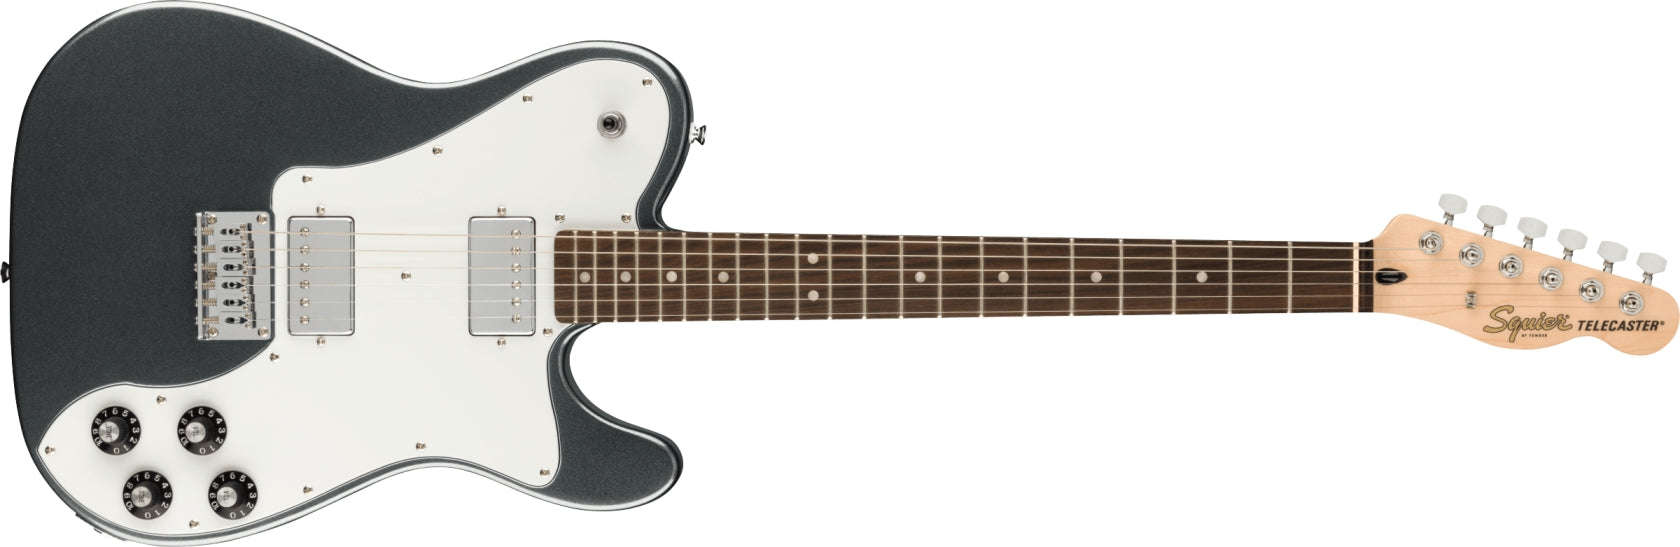 Squier - Affinity Series™ Telecaster® Deluxe - Laurel Fingerboard - White  Pickguard - Charcoal Frost Metallic 037-8250-569